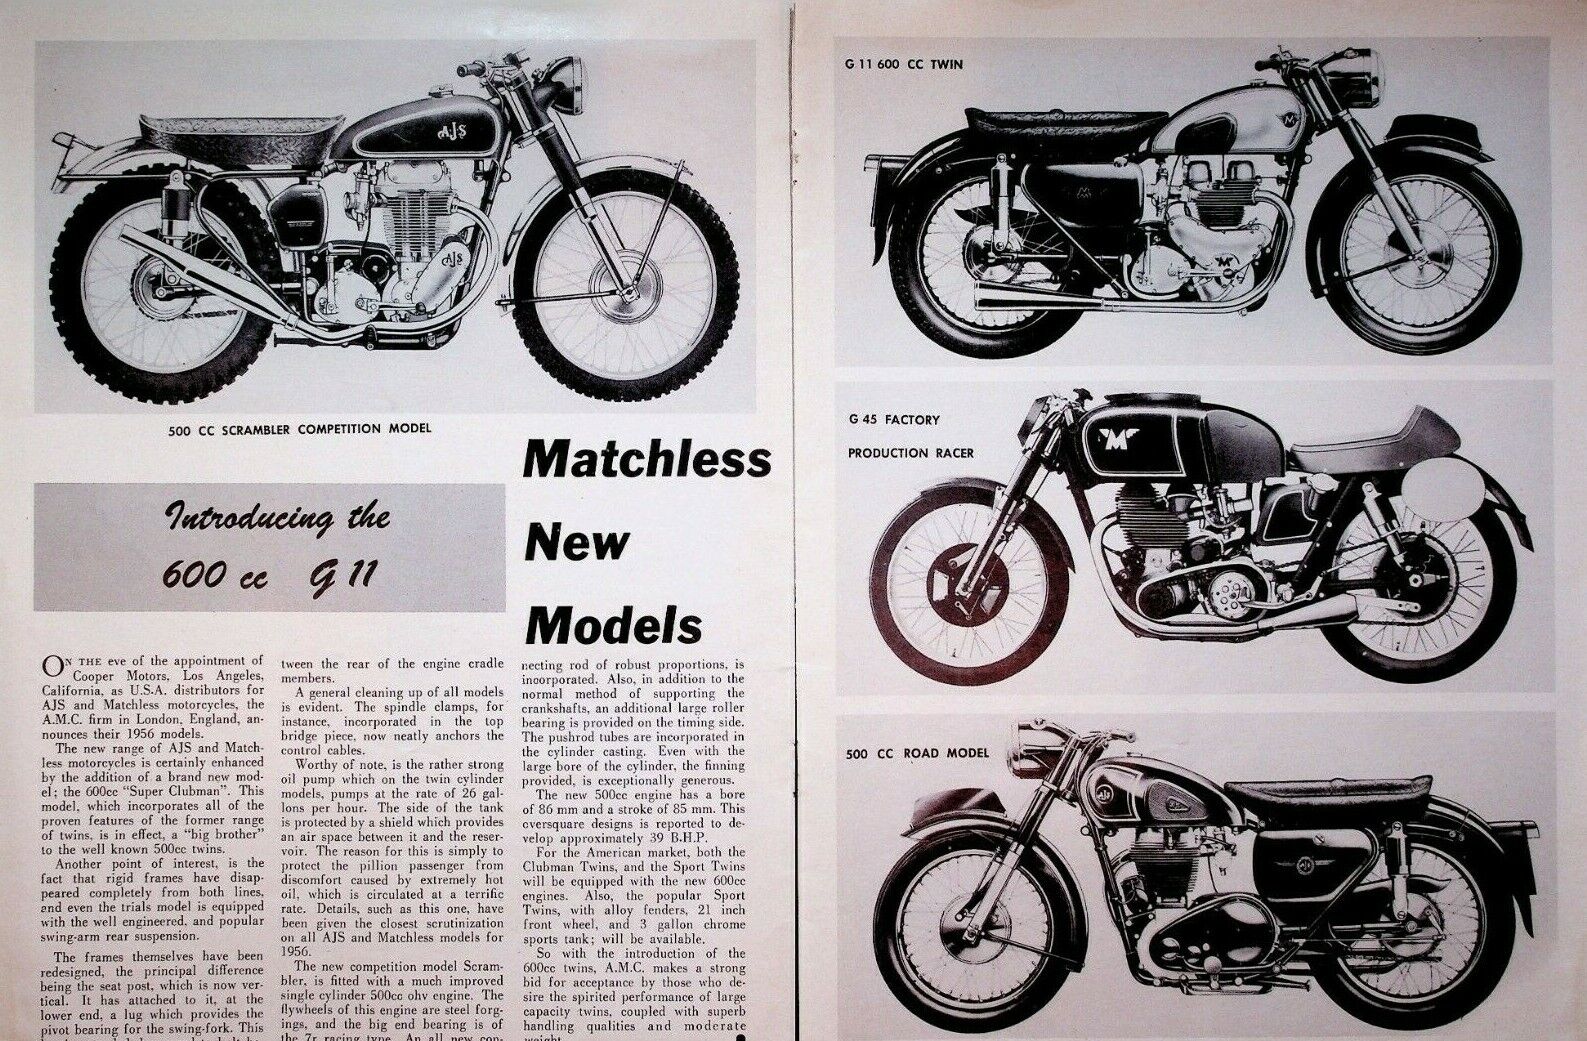 1955 Matchless Models G11 600cc Twin & More - 2-Page Vintage Motorcycle Article